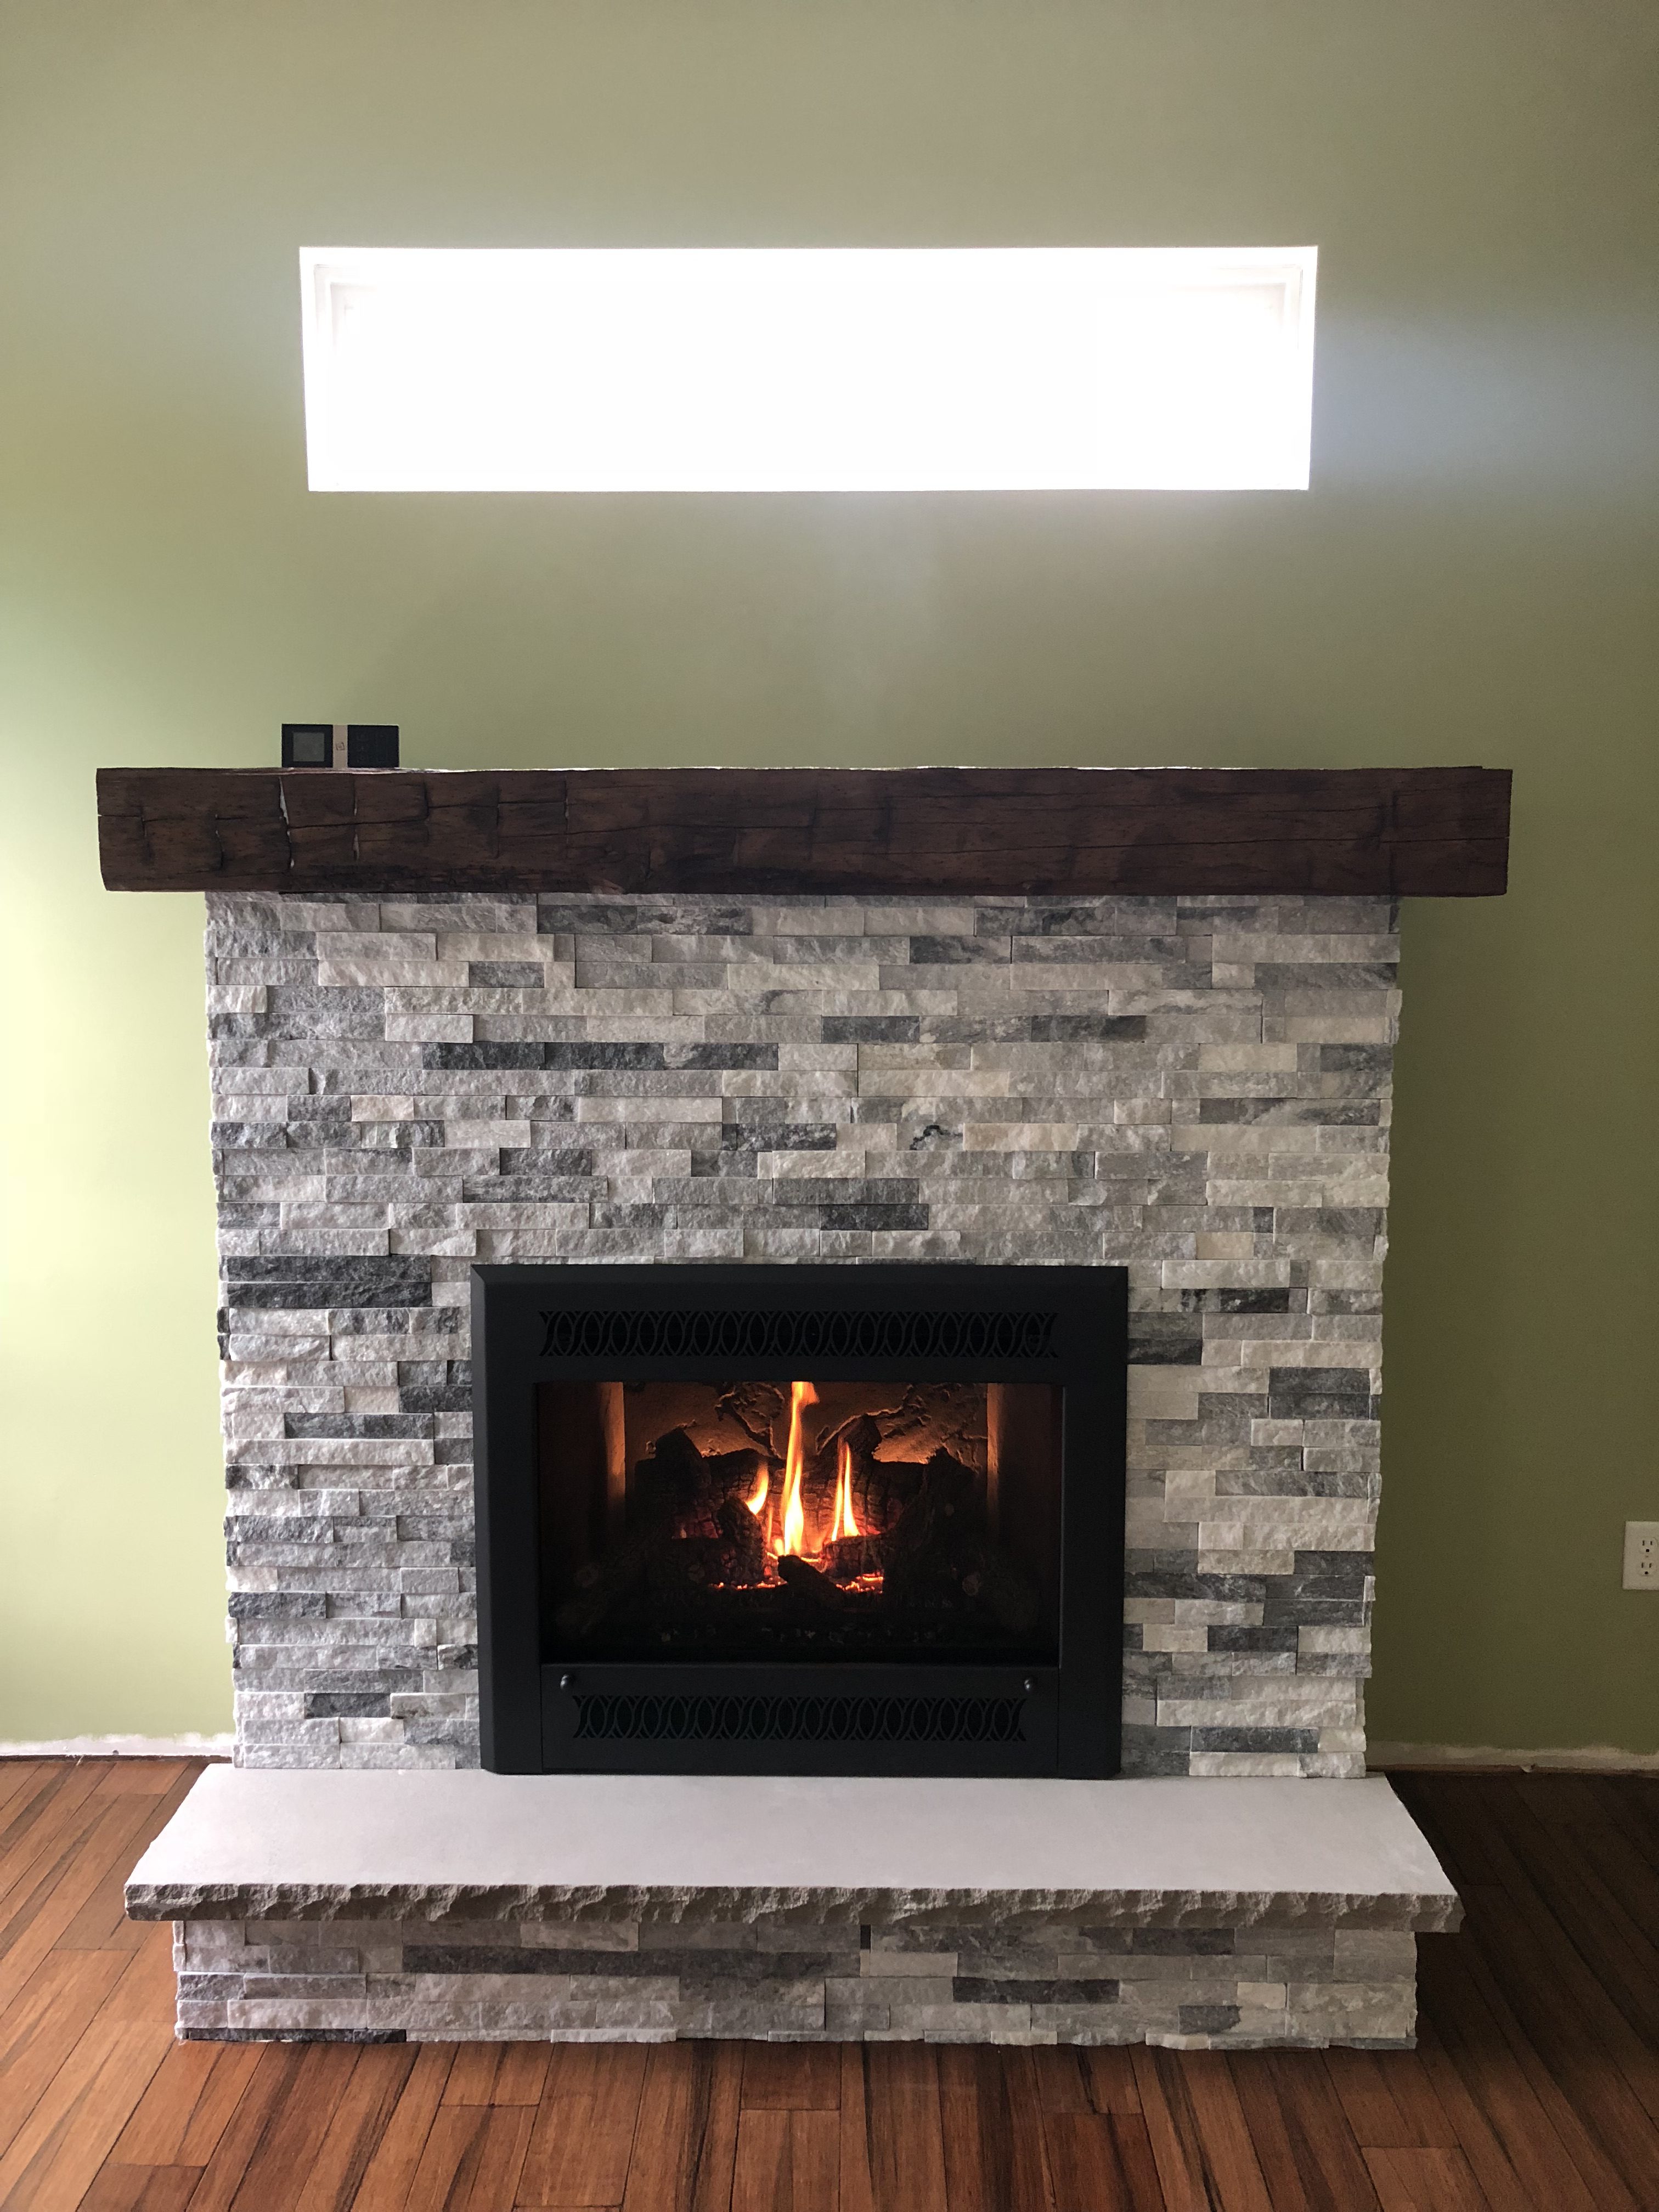 Image of a traditional 564 HighOutput gas fireplace by Fireplace X featuring rustic stonework facing and mantle.